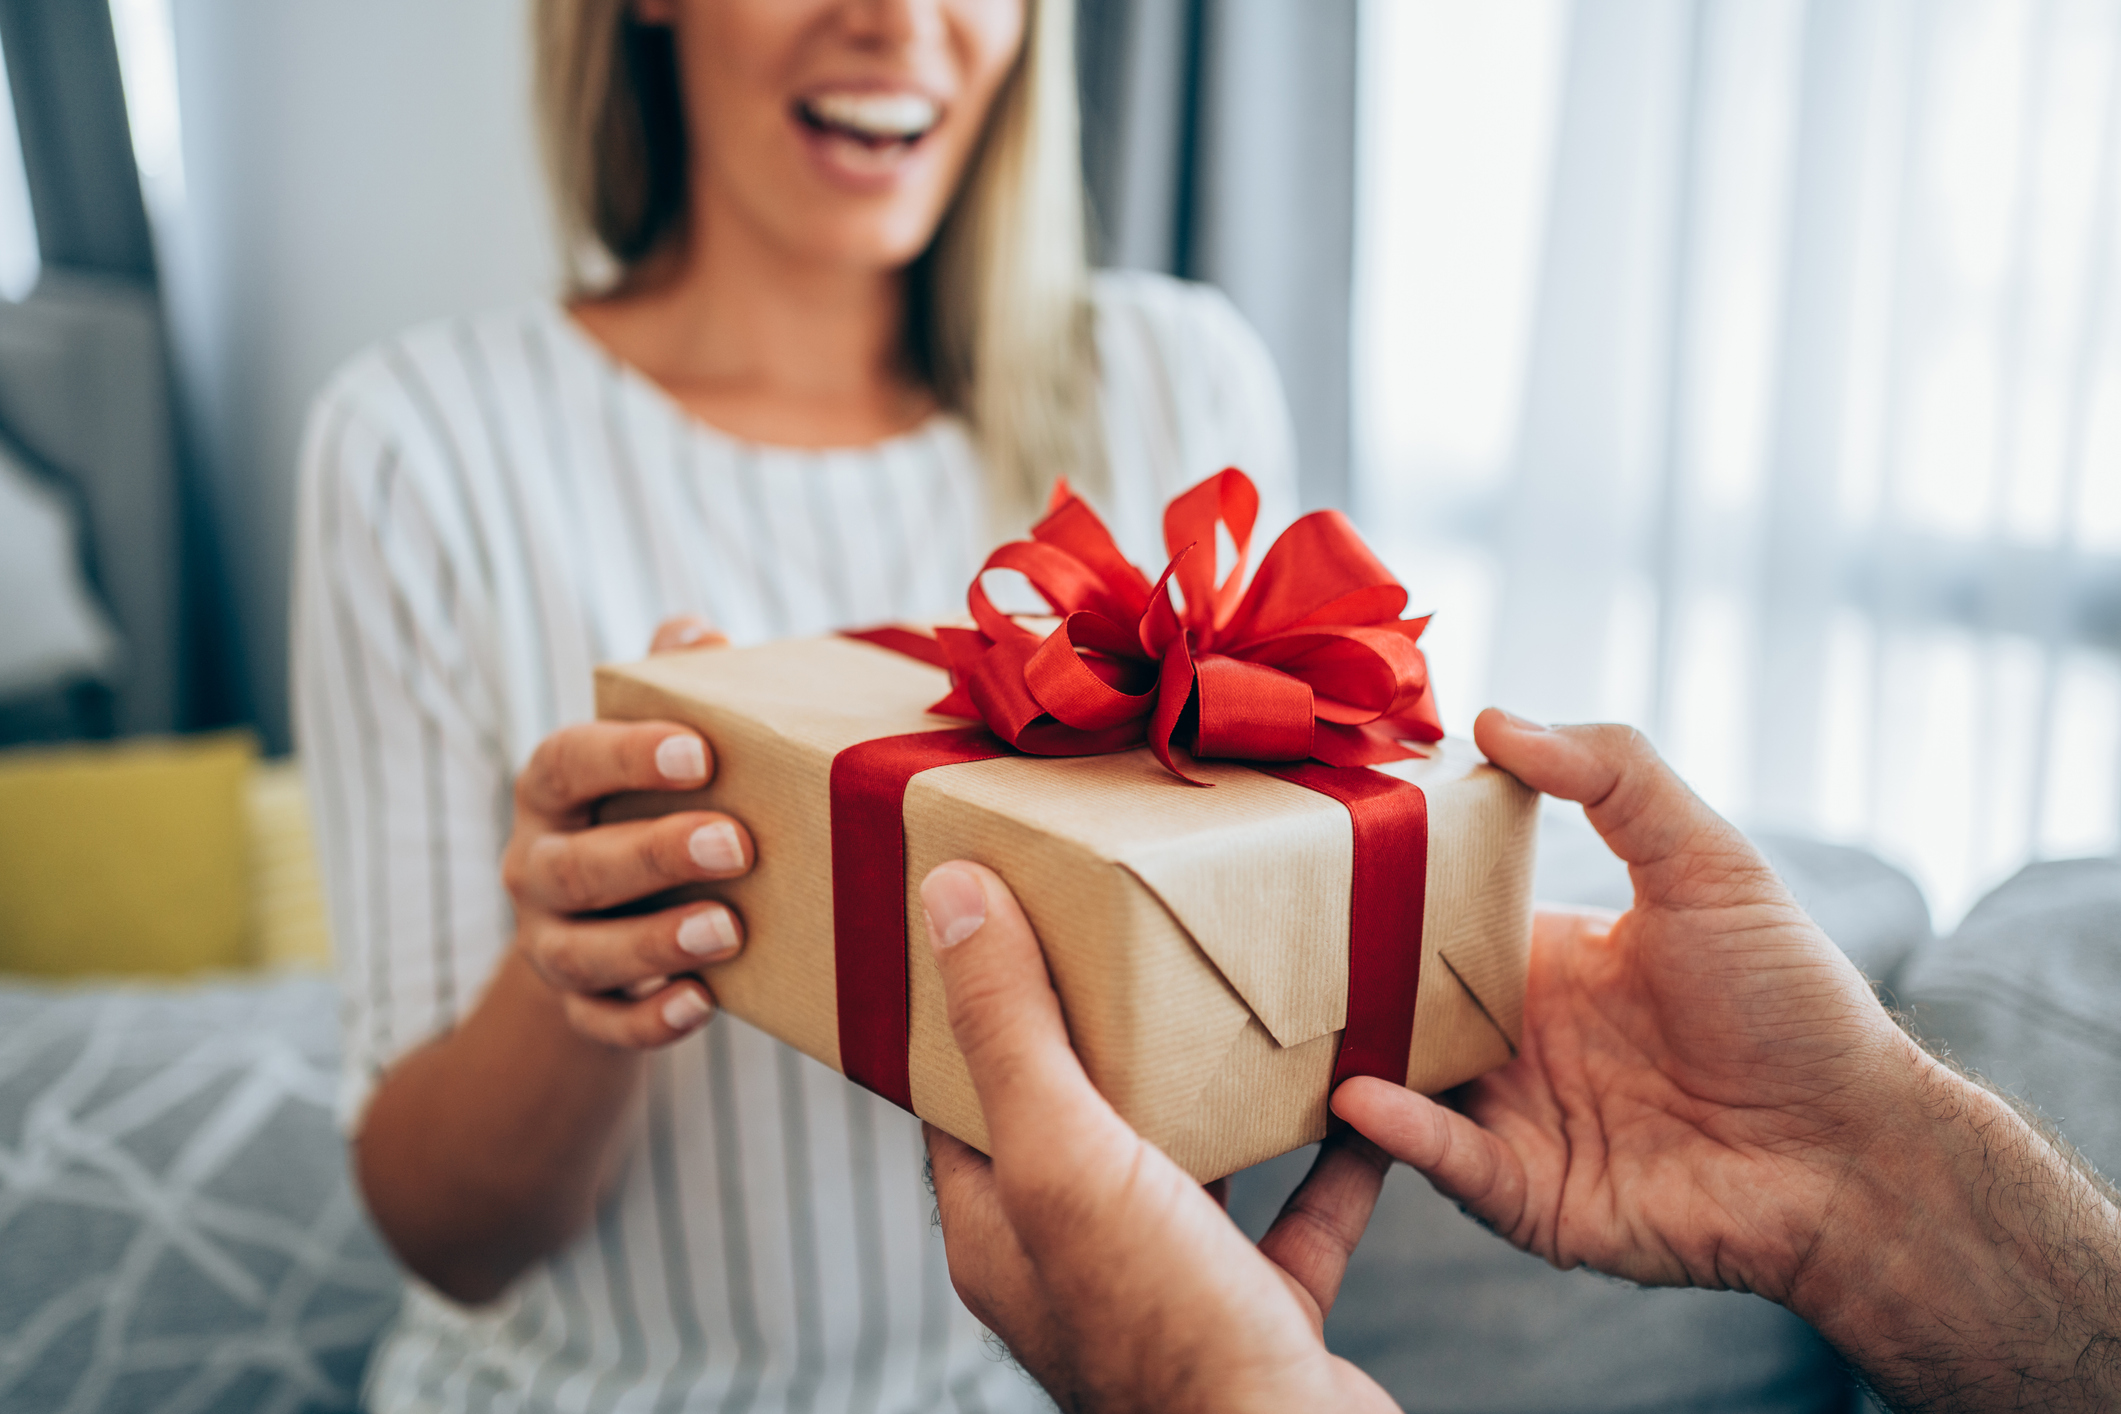 Cheerful young woman receiving a gift from her boyfriend.